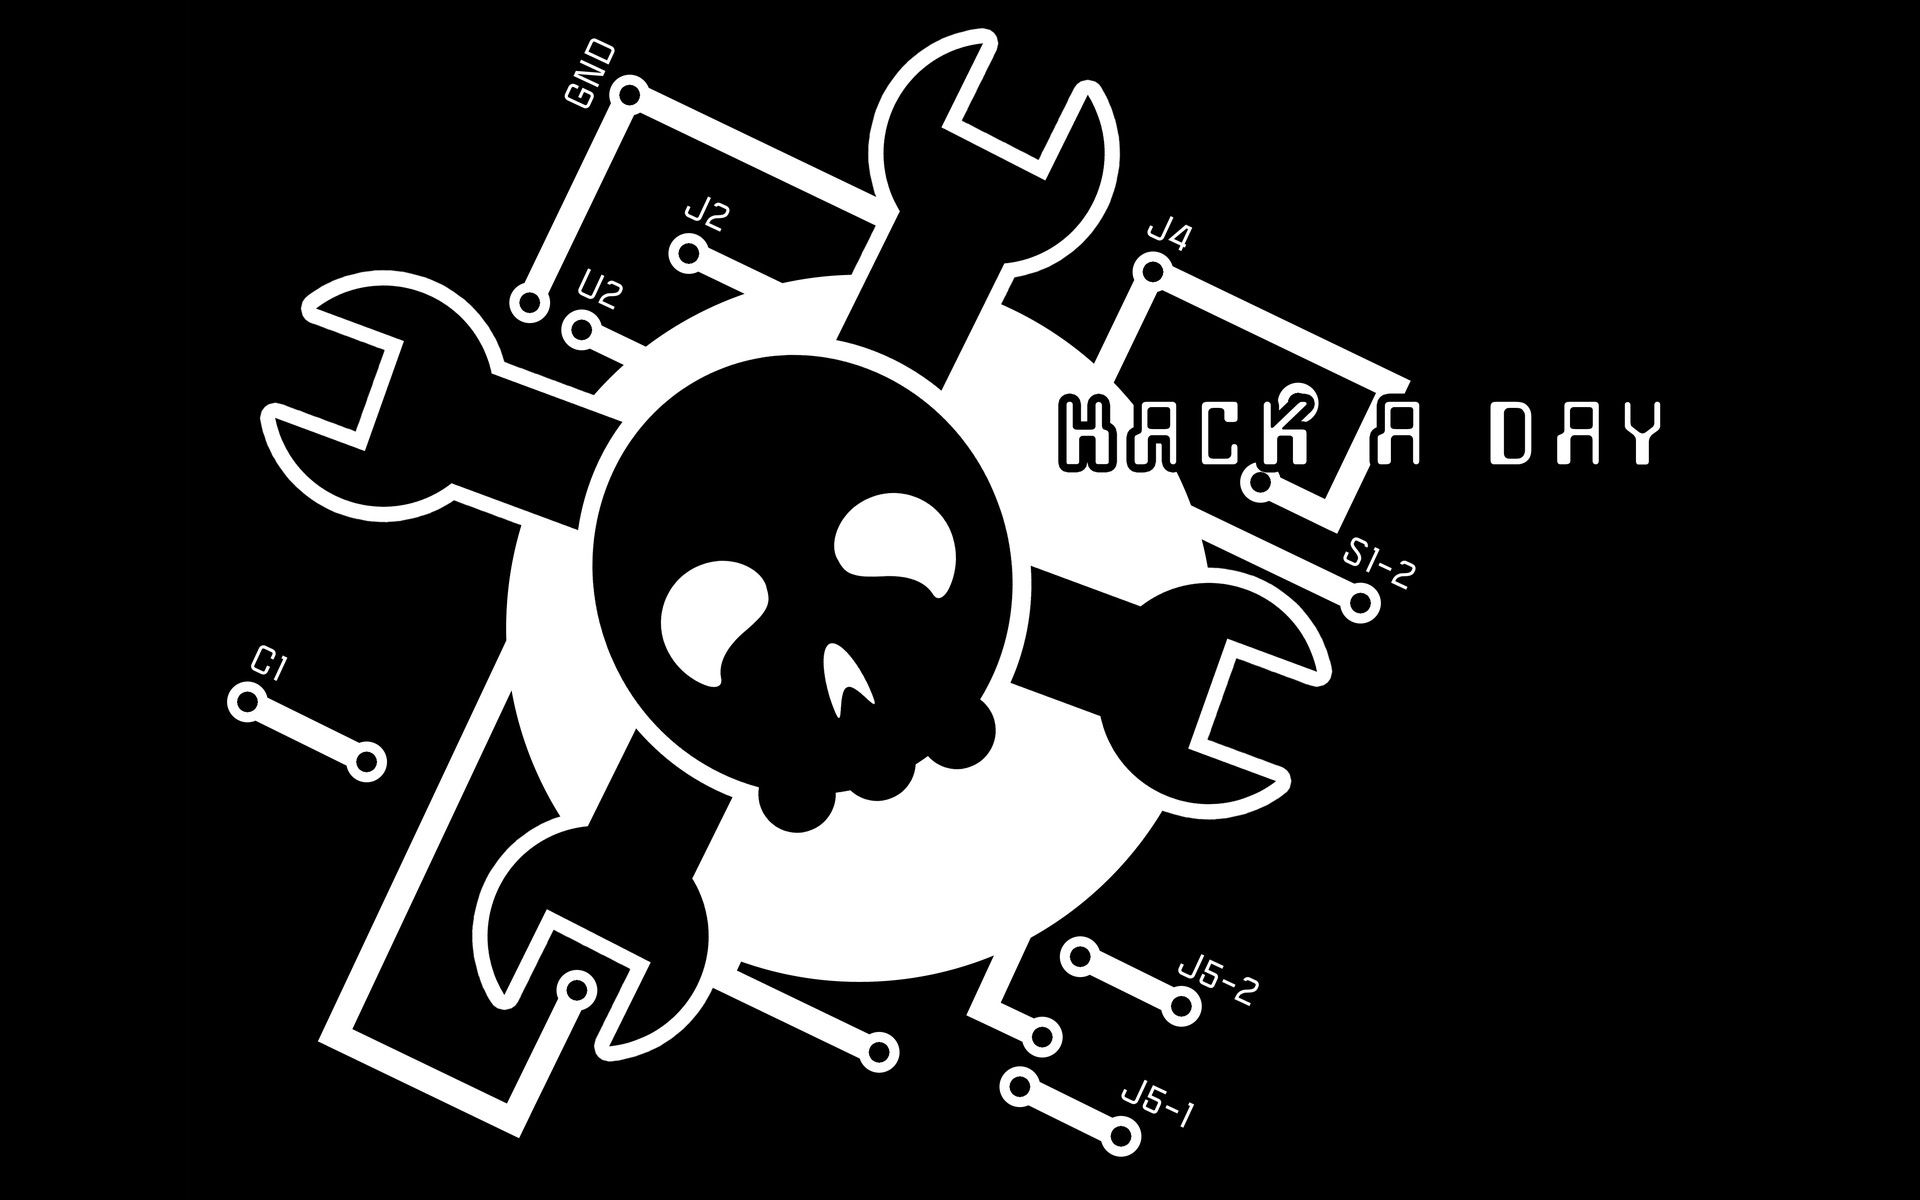 Hack a Day Wallpaper. Holiday Wallpaper, Day of the Dead Wallpaper and Day of the Dead Skull Wallpaper